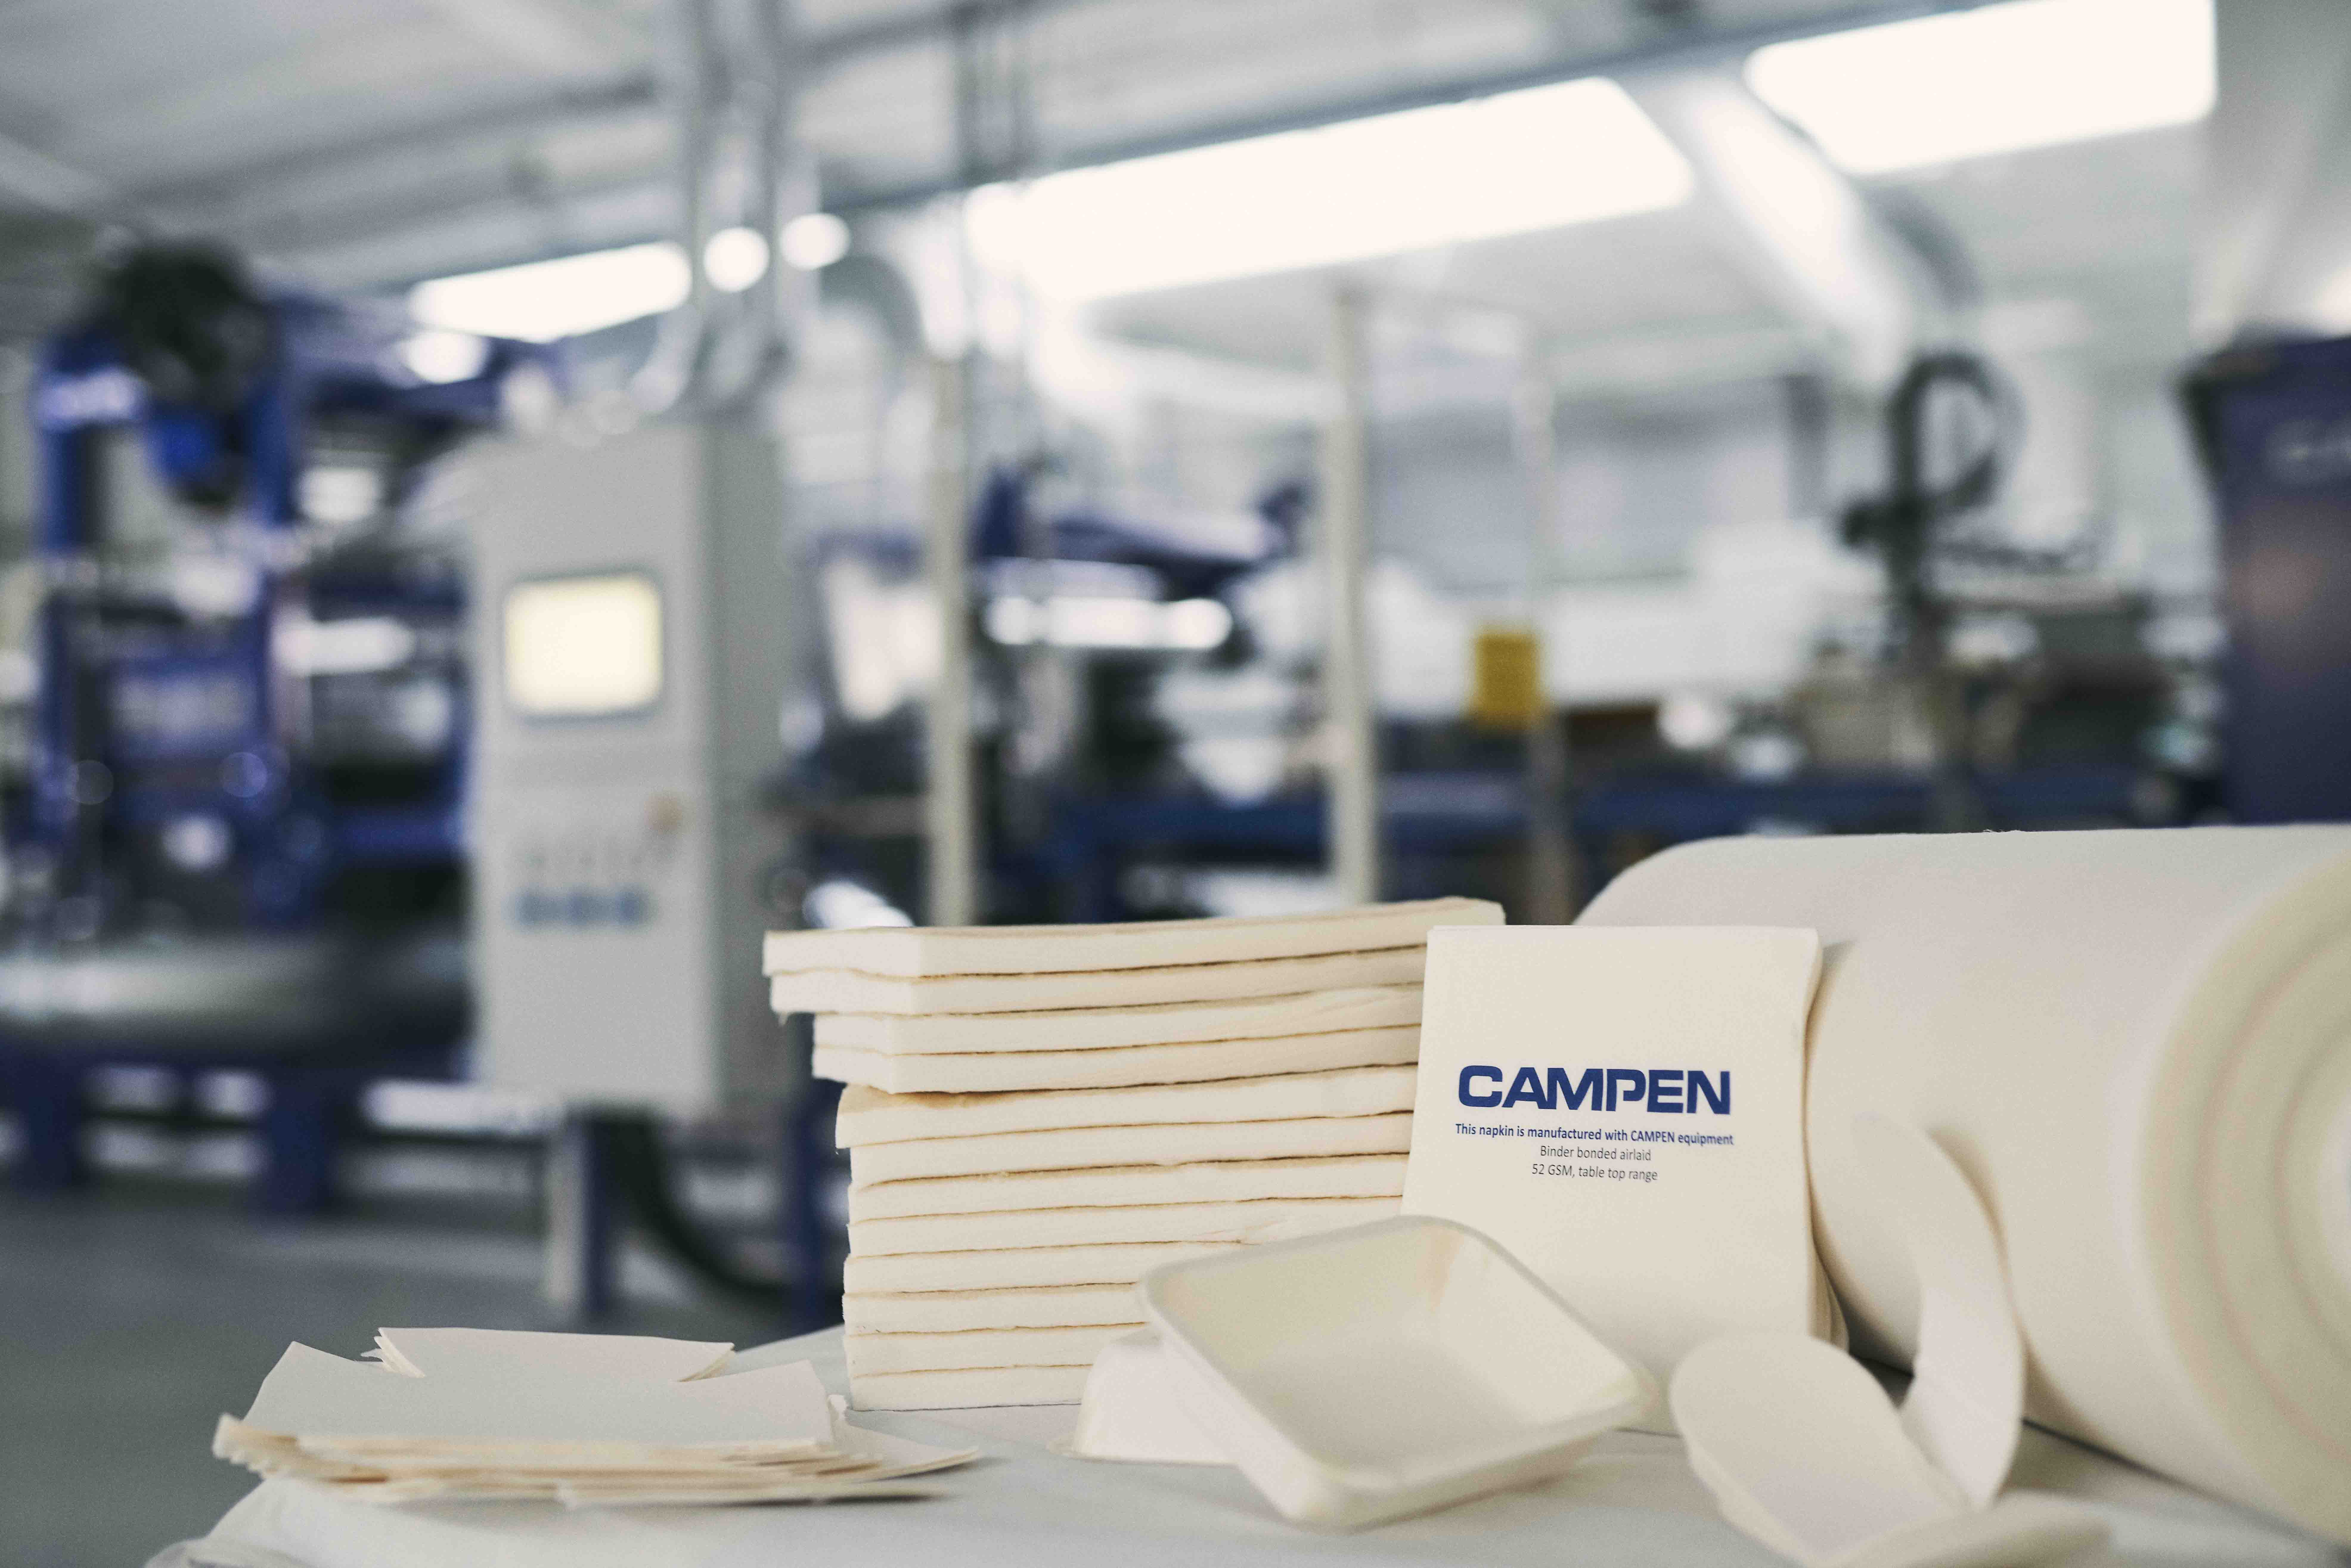 With CAMPENs airlaid technology you can produce a wide range of high-quality airlaid products.